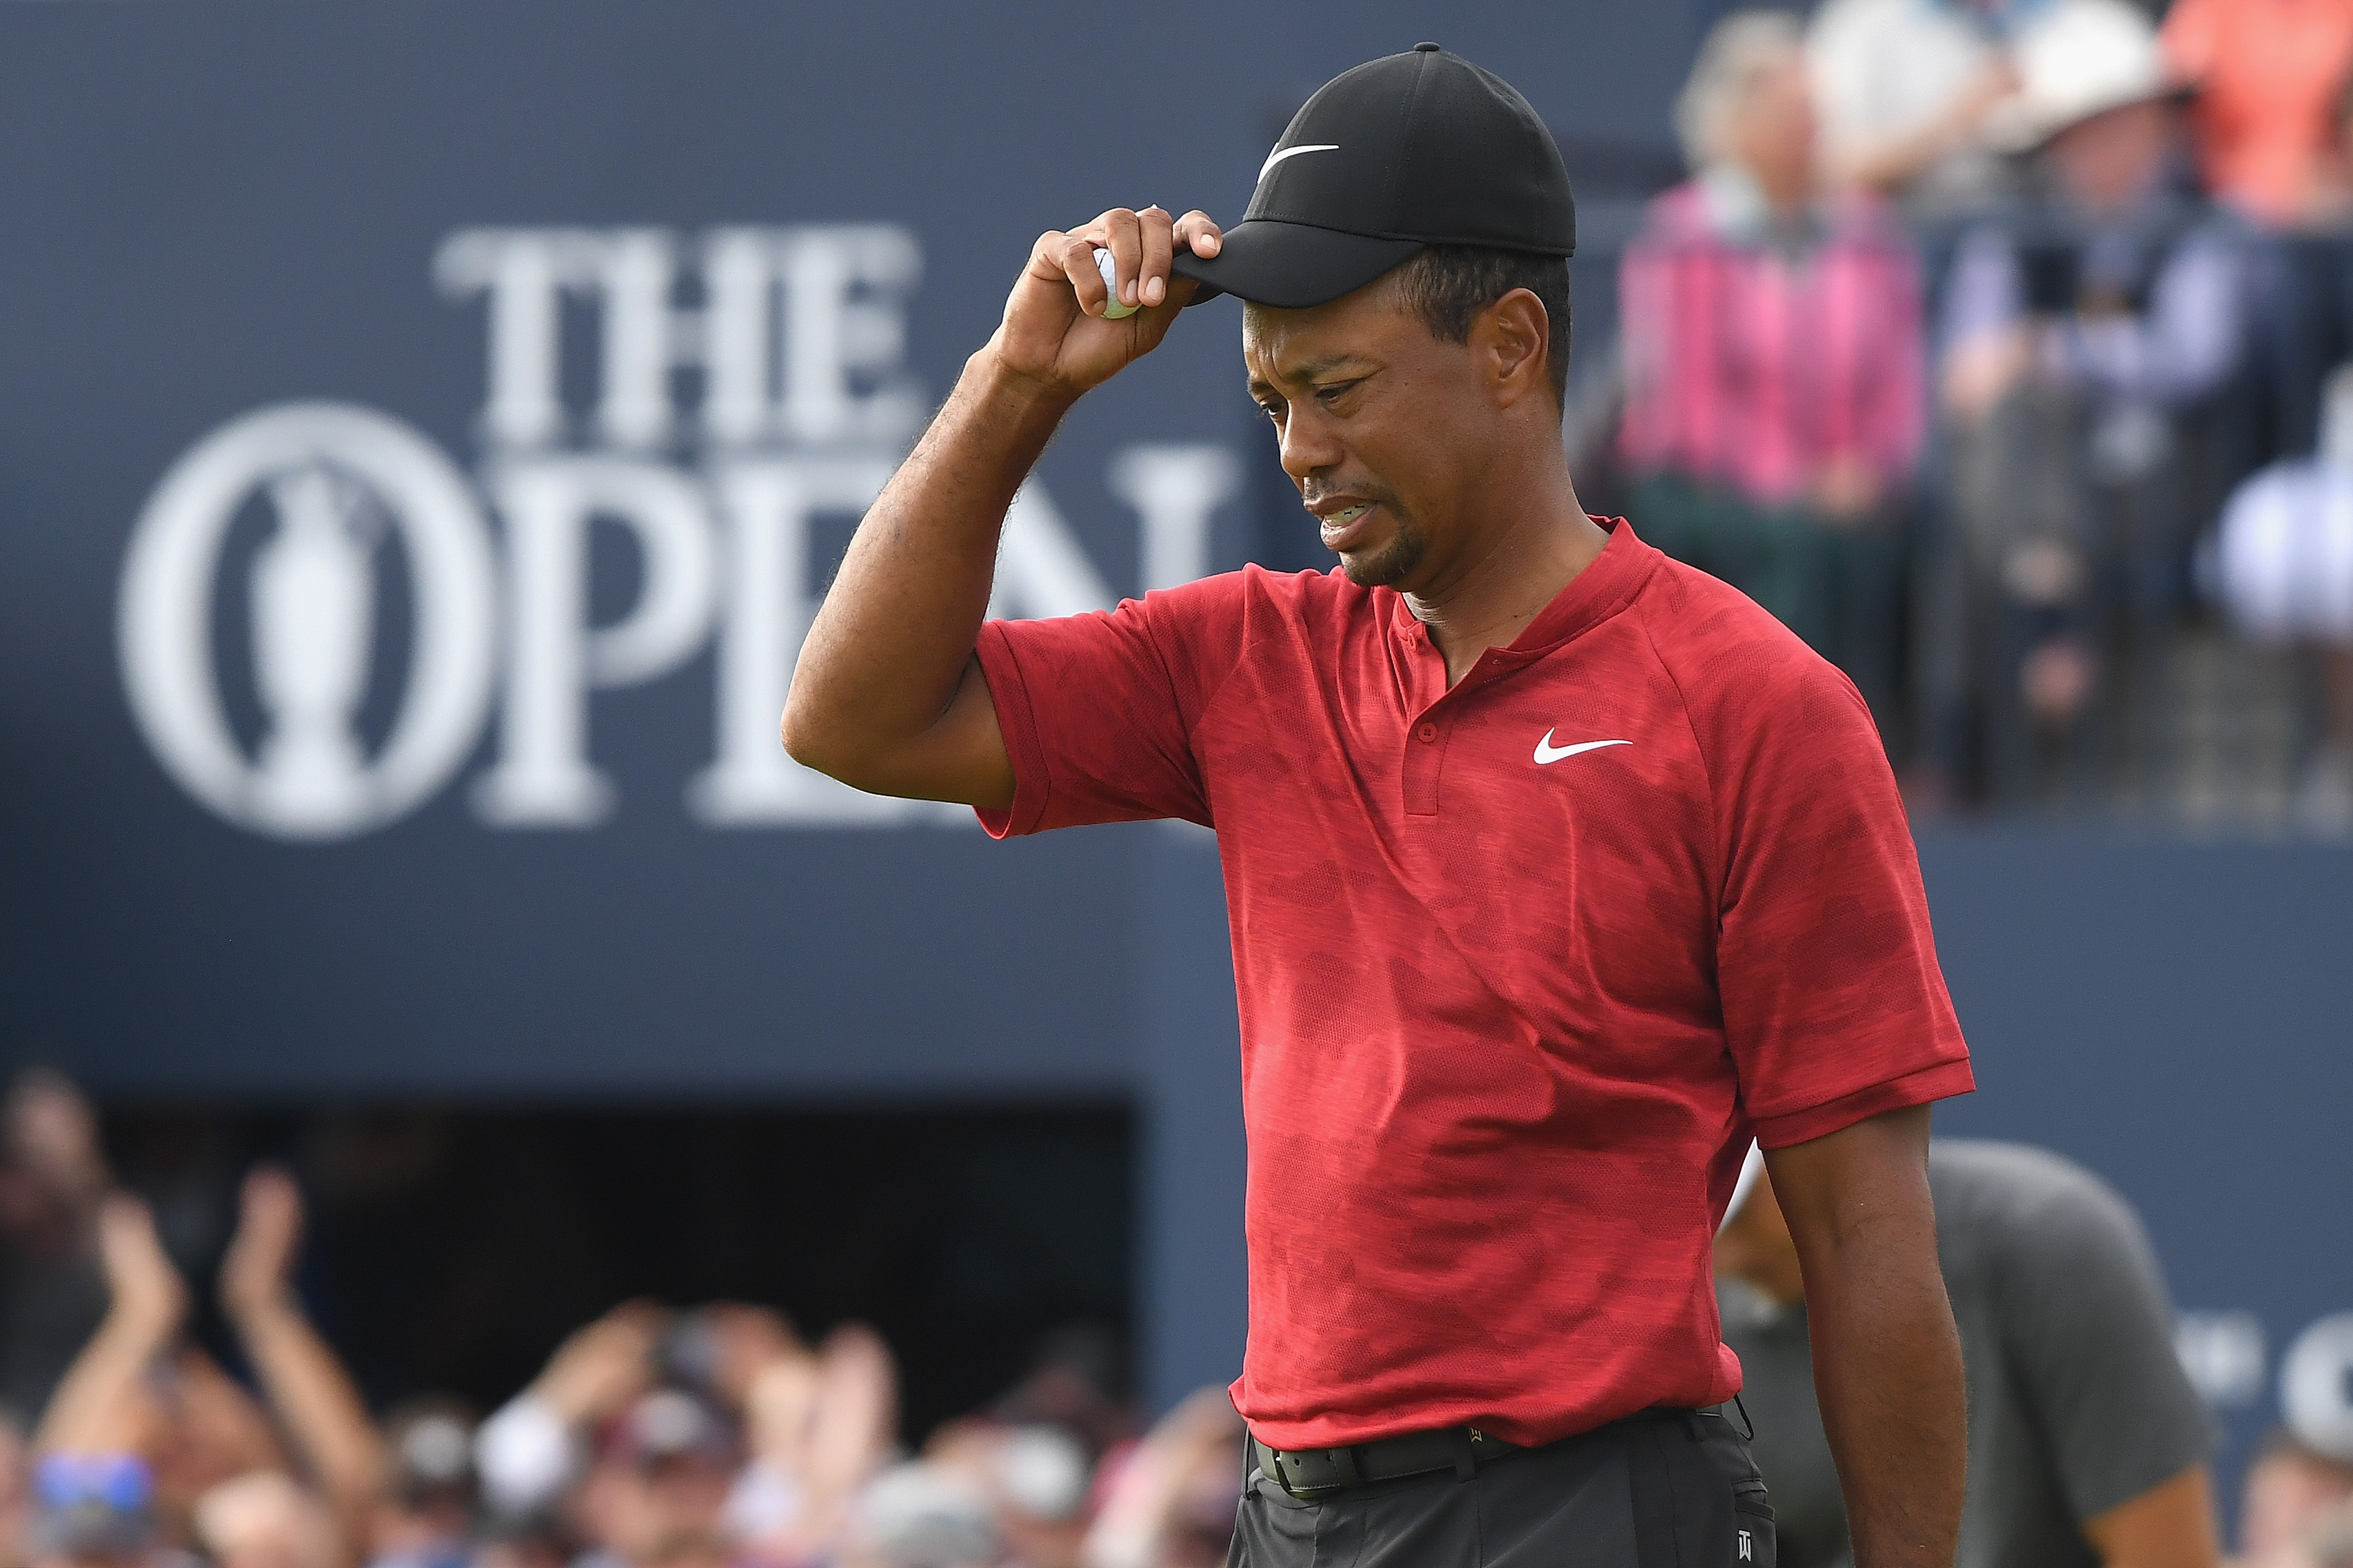 WATCH: Fan who was hit by Tiger Woods at Open filmed entire incident